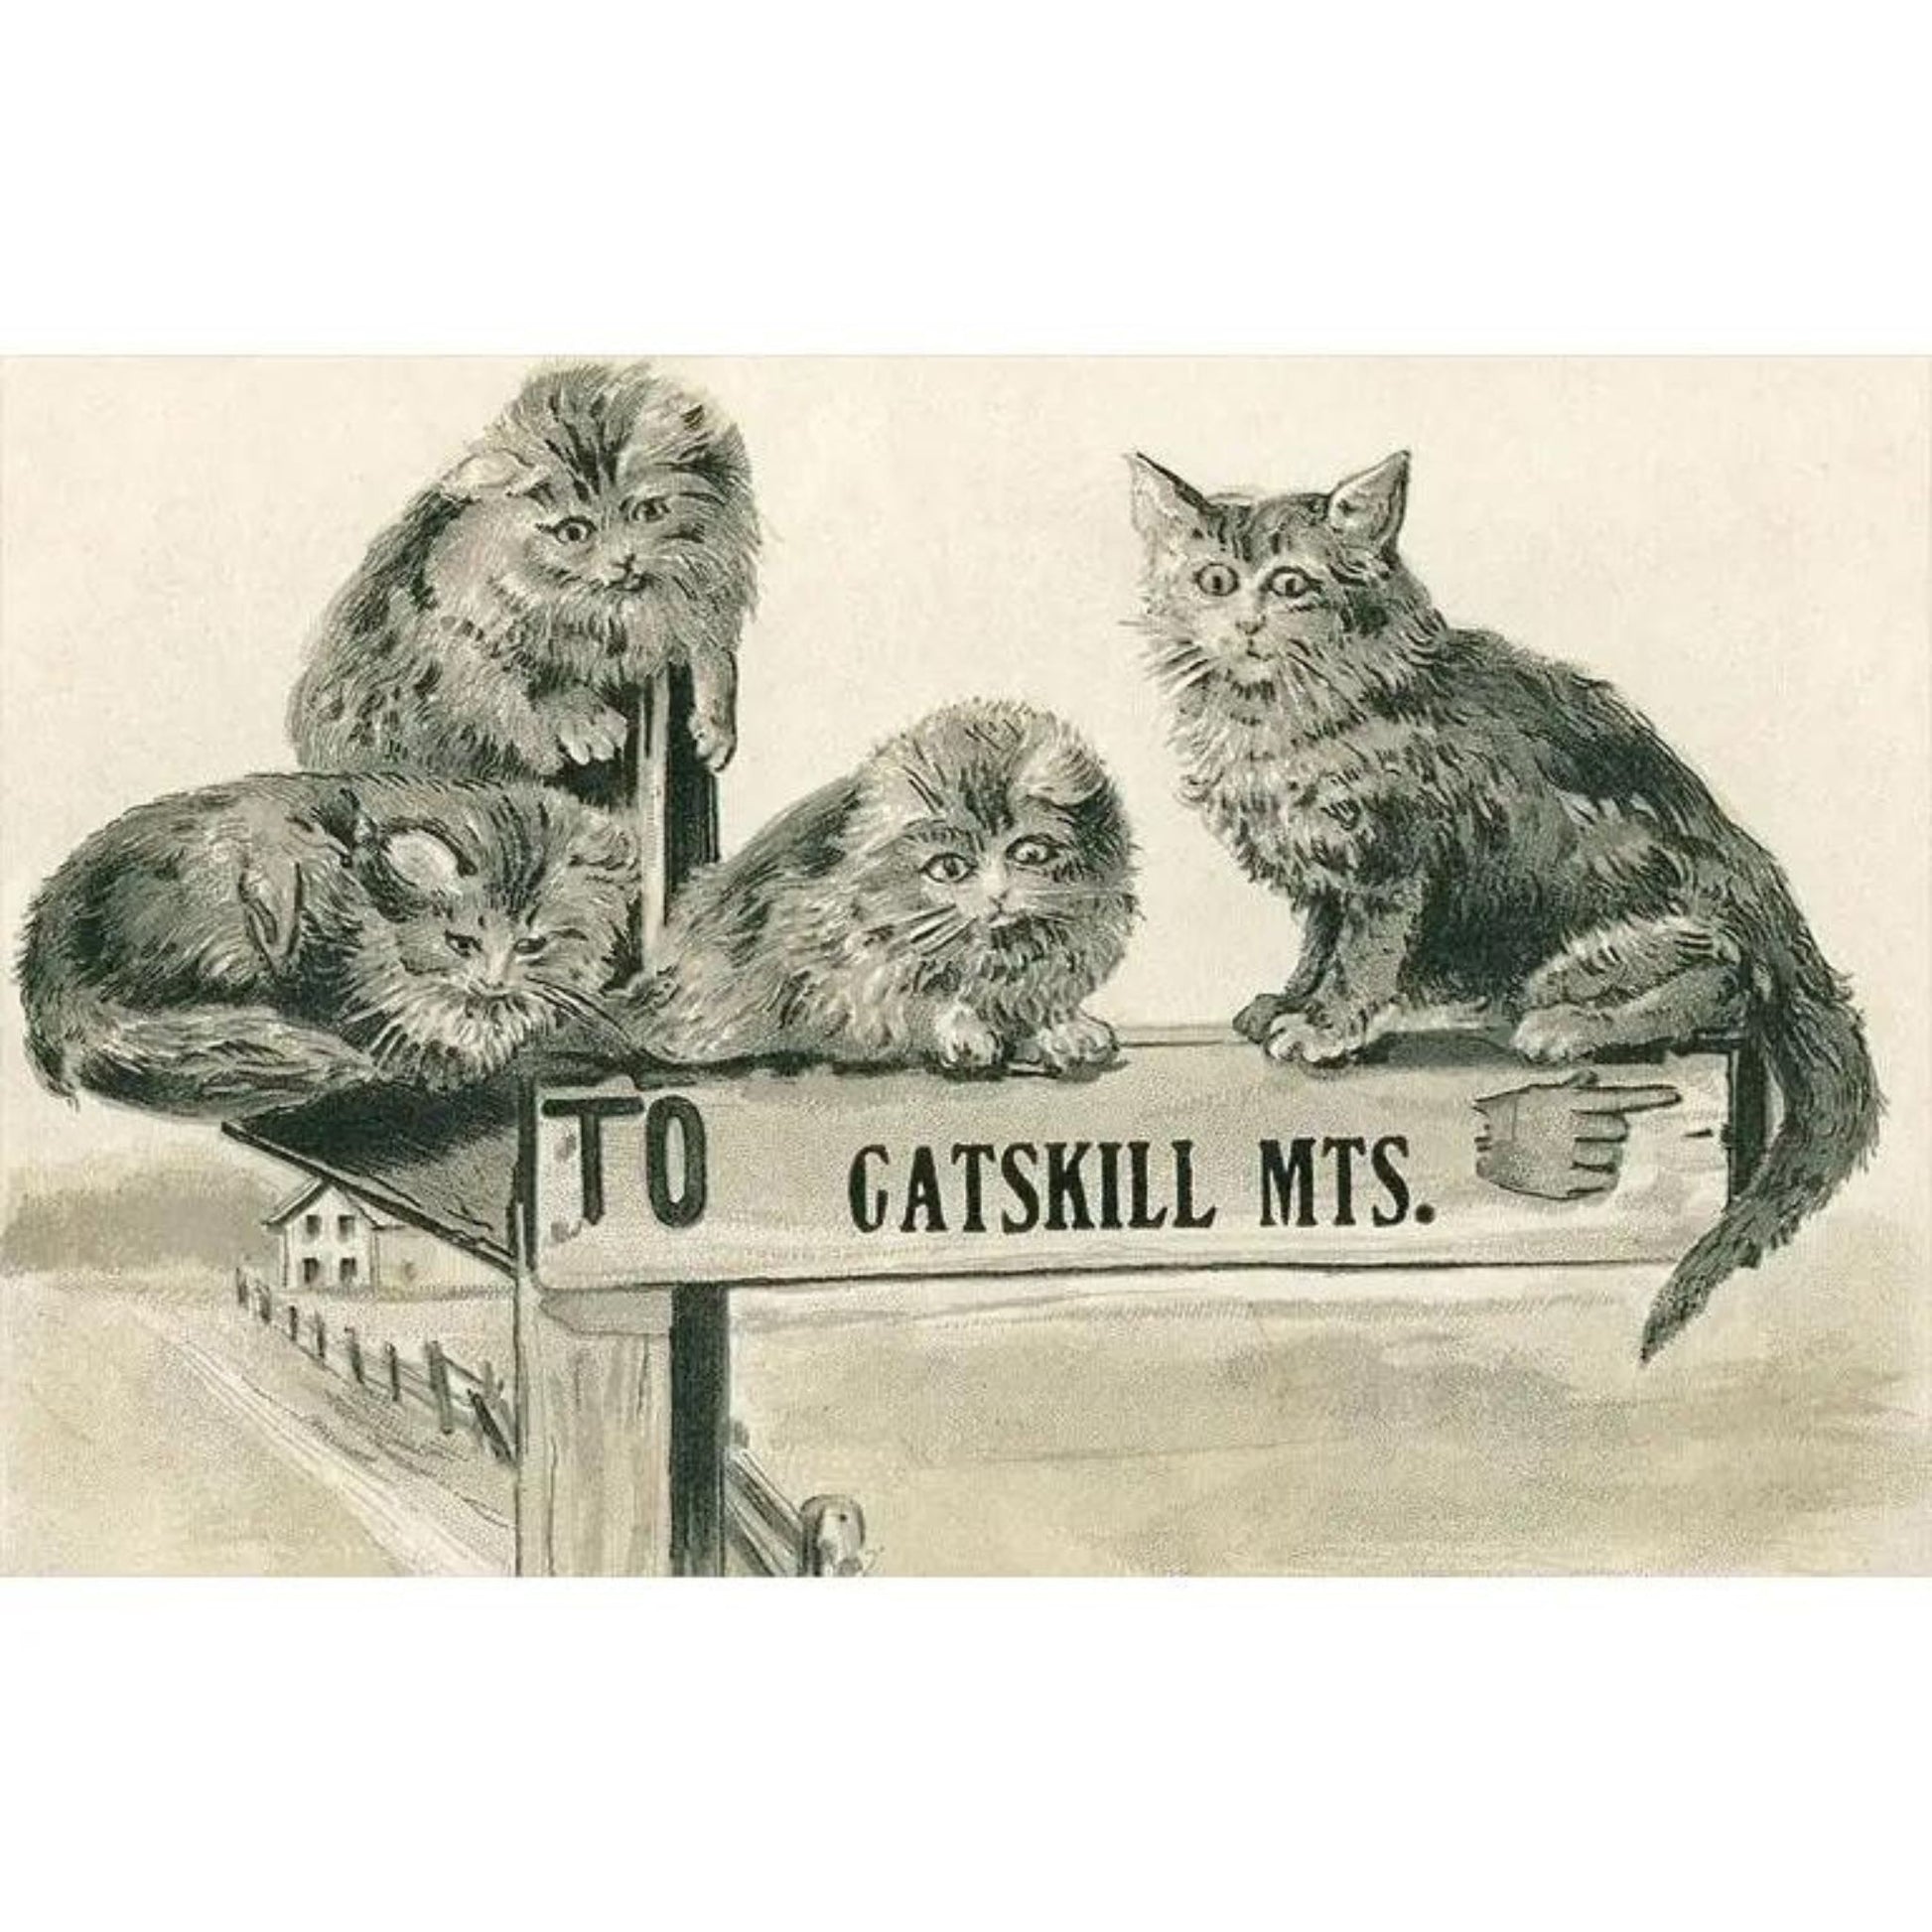 Vintage postcard with 4 cats sitting on a sign that says "to Catskill Mts."